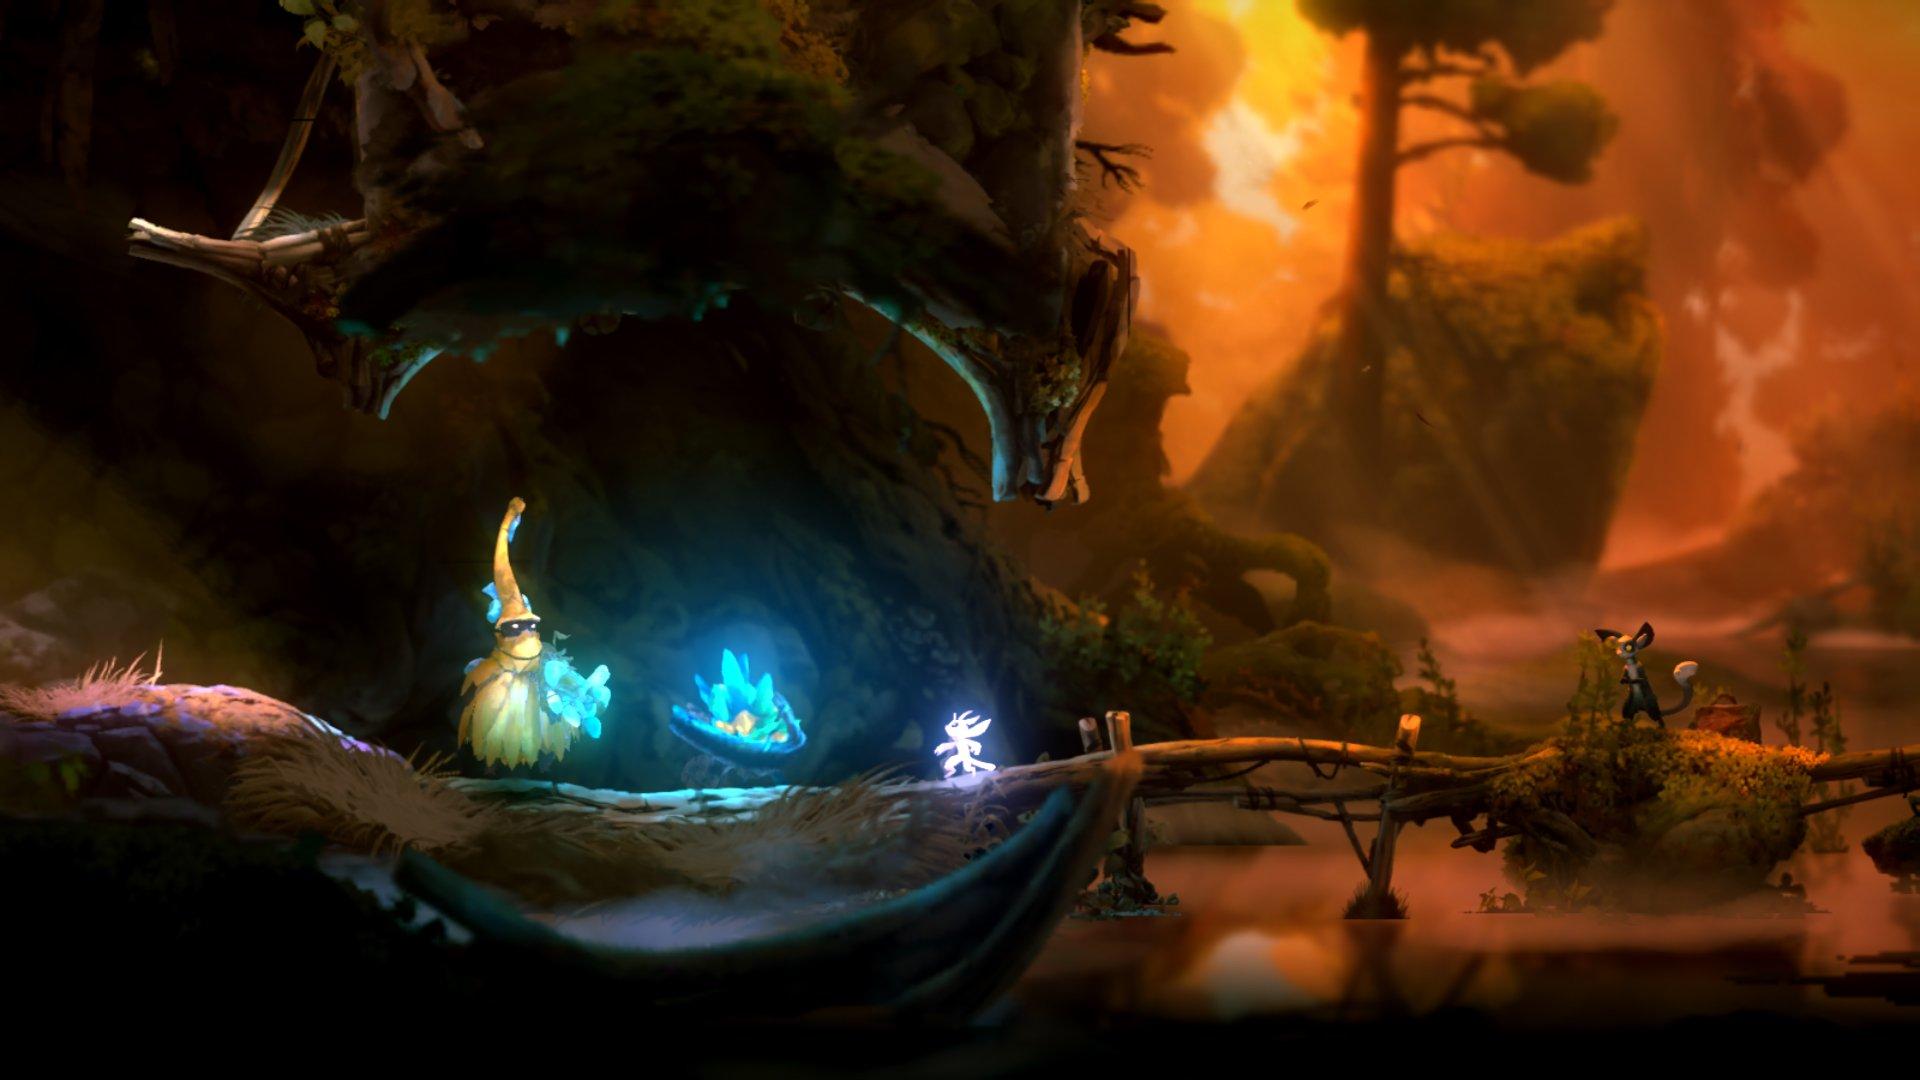 Ori and the Will of the Wisps - Nintendo Switch, Nintendo Switch